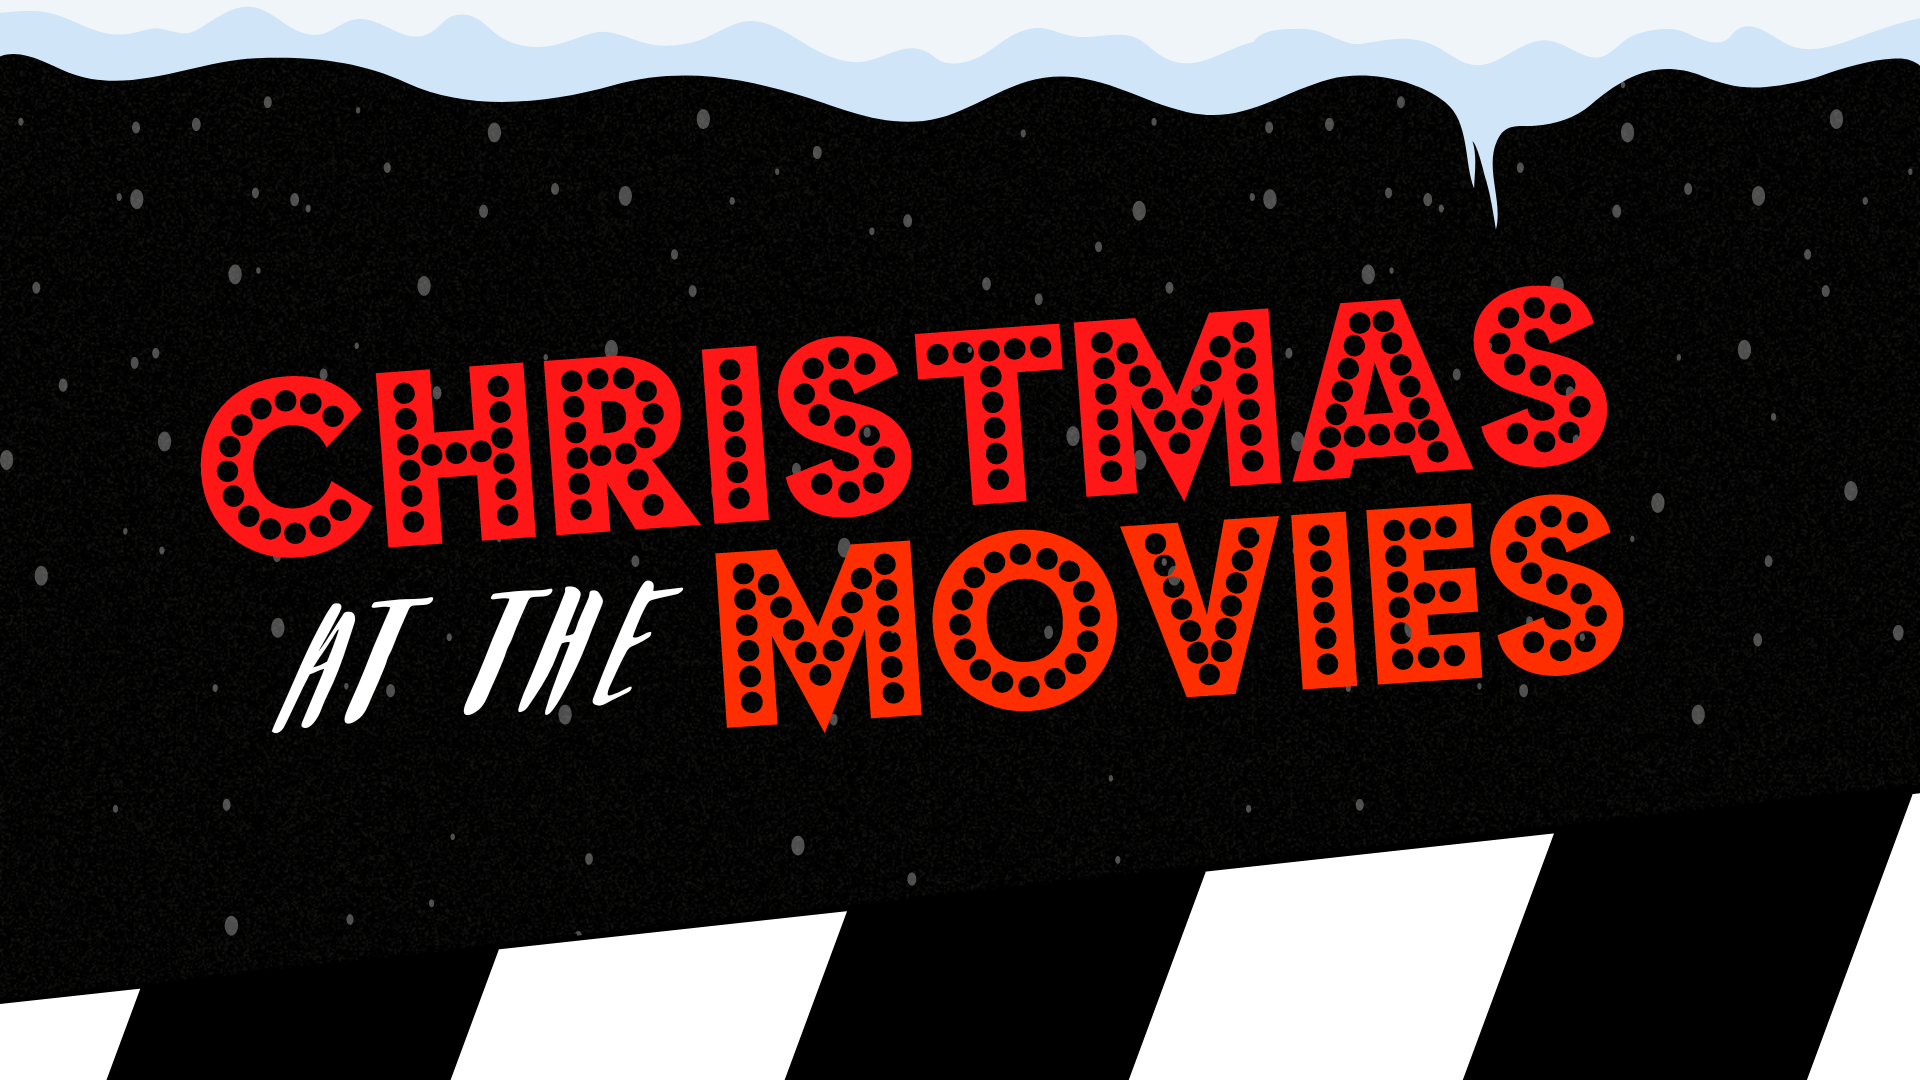 Christmas at The Movies part 2